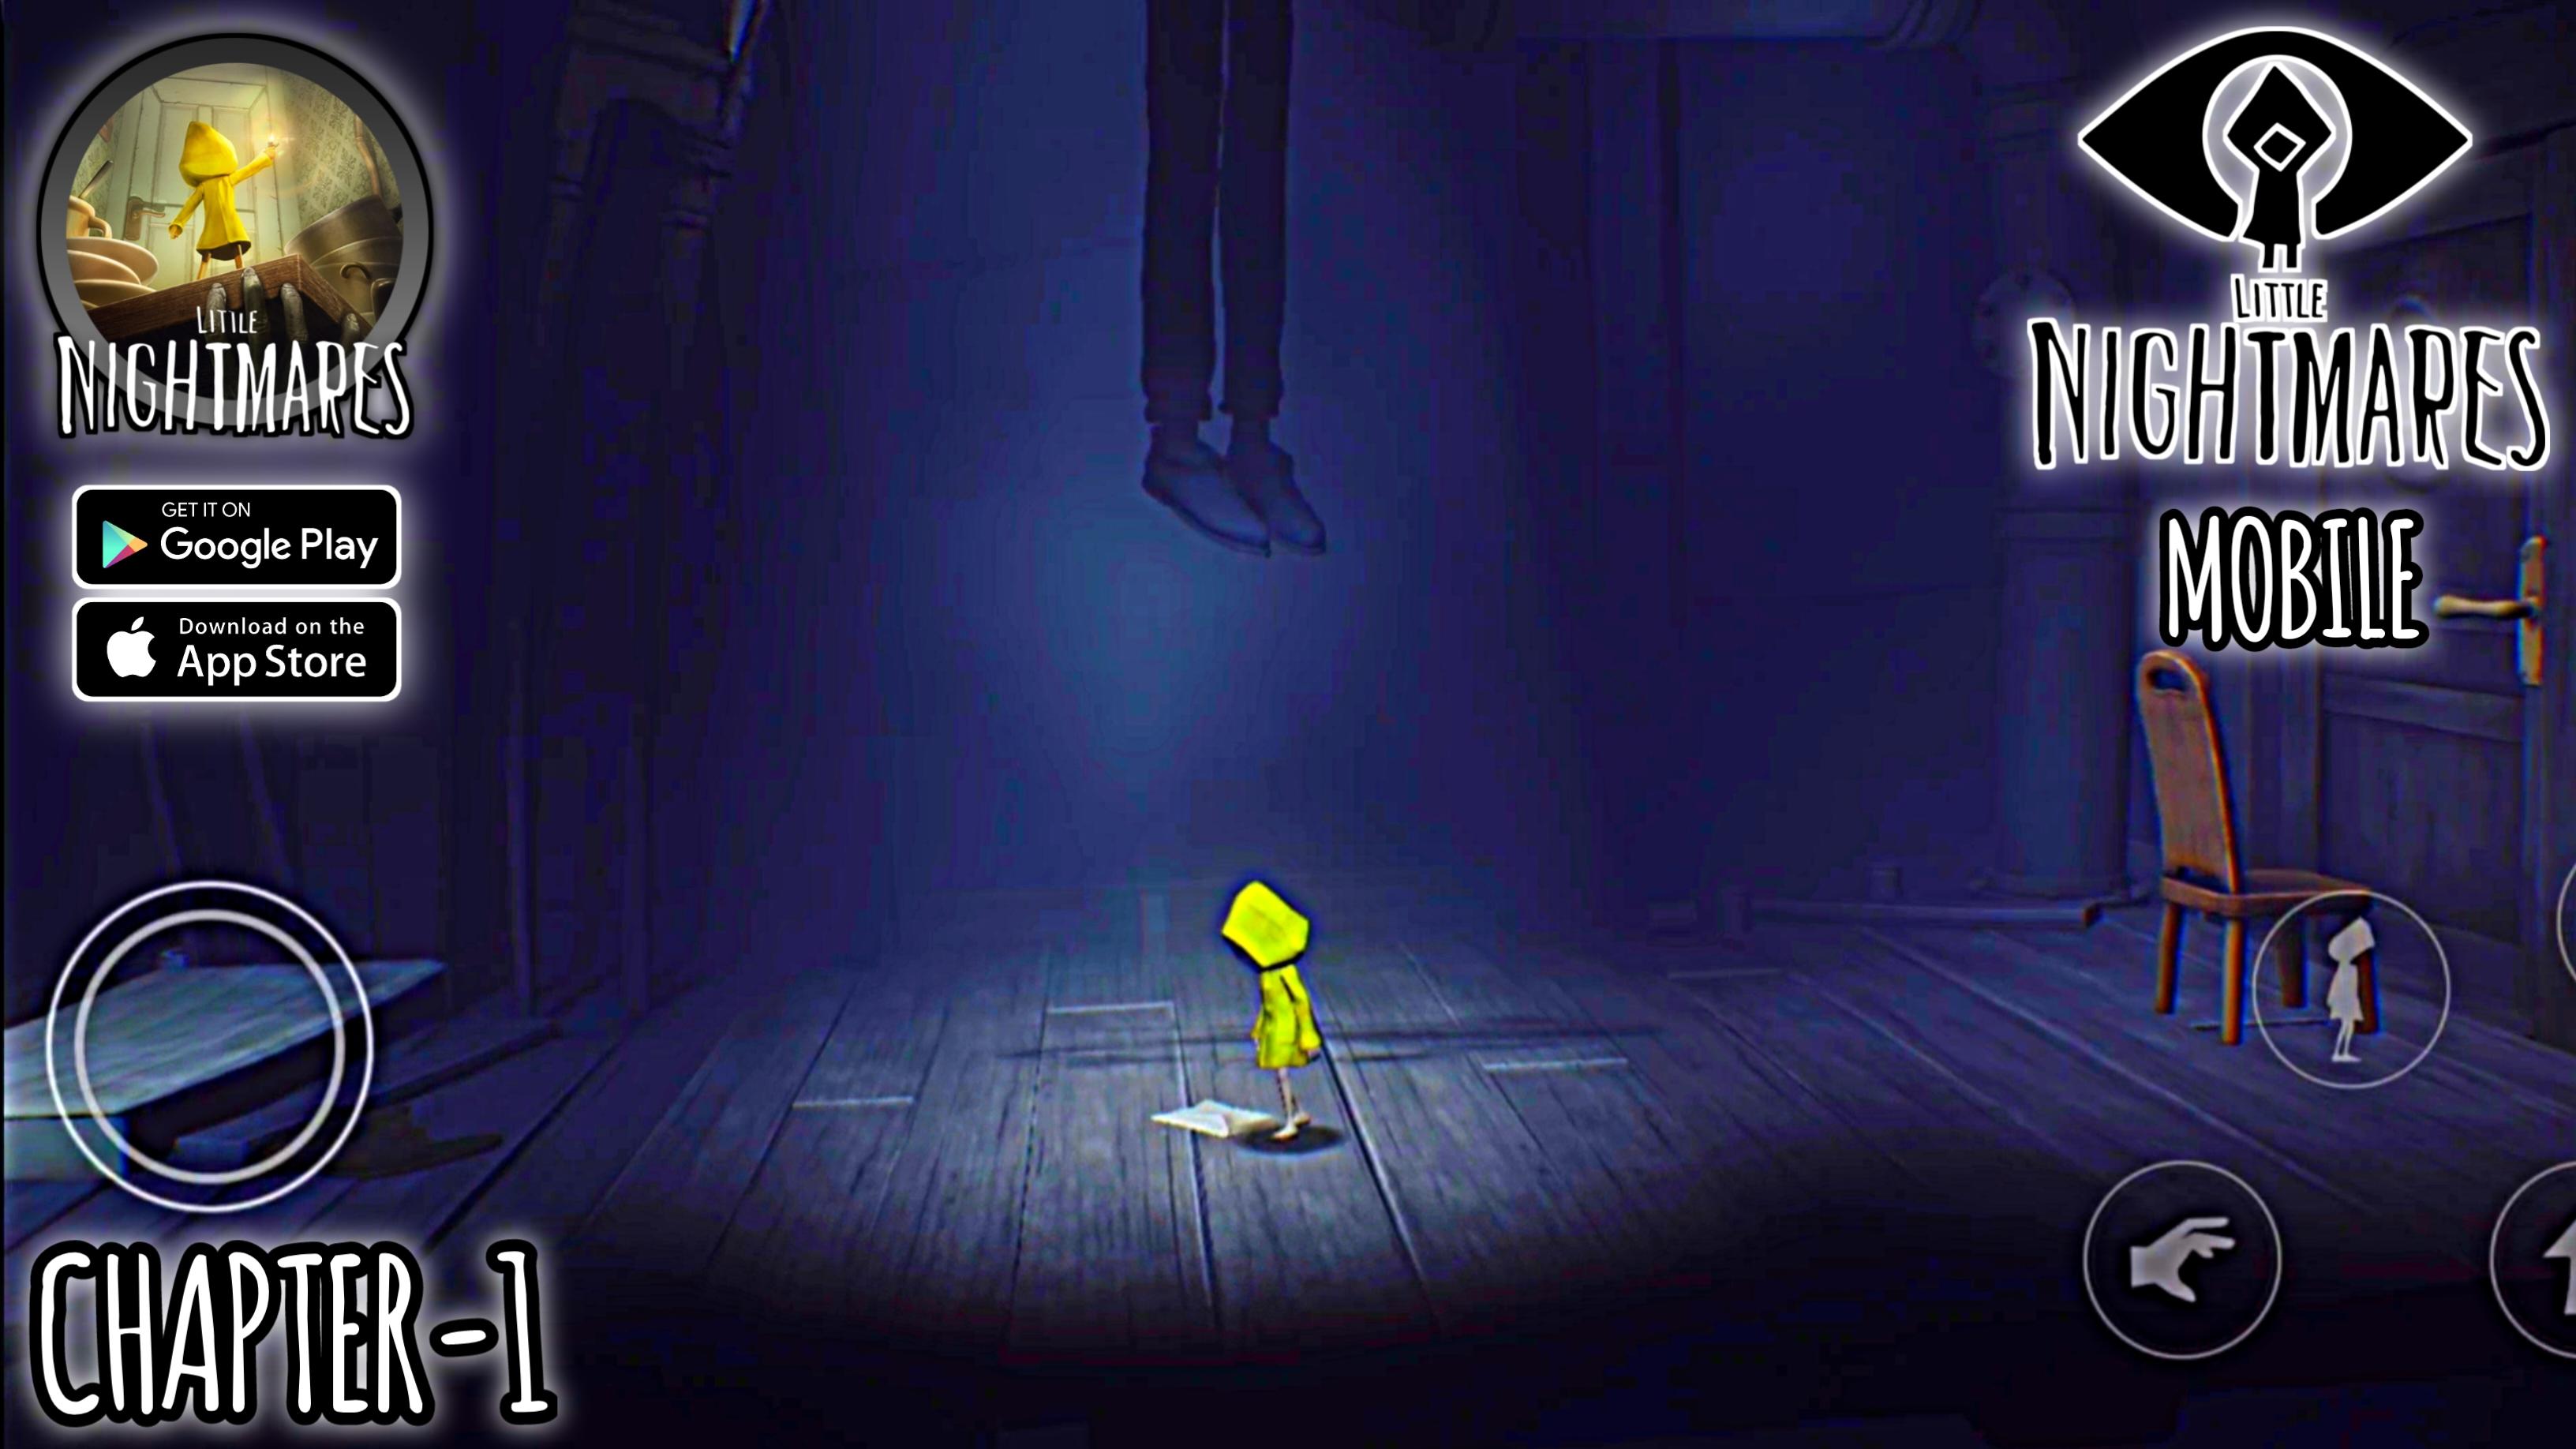 Little Nightmares Mobile: Chapter 1 - The Prison - Android/IOS Max Graphics Gameplay